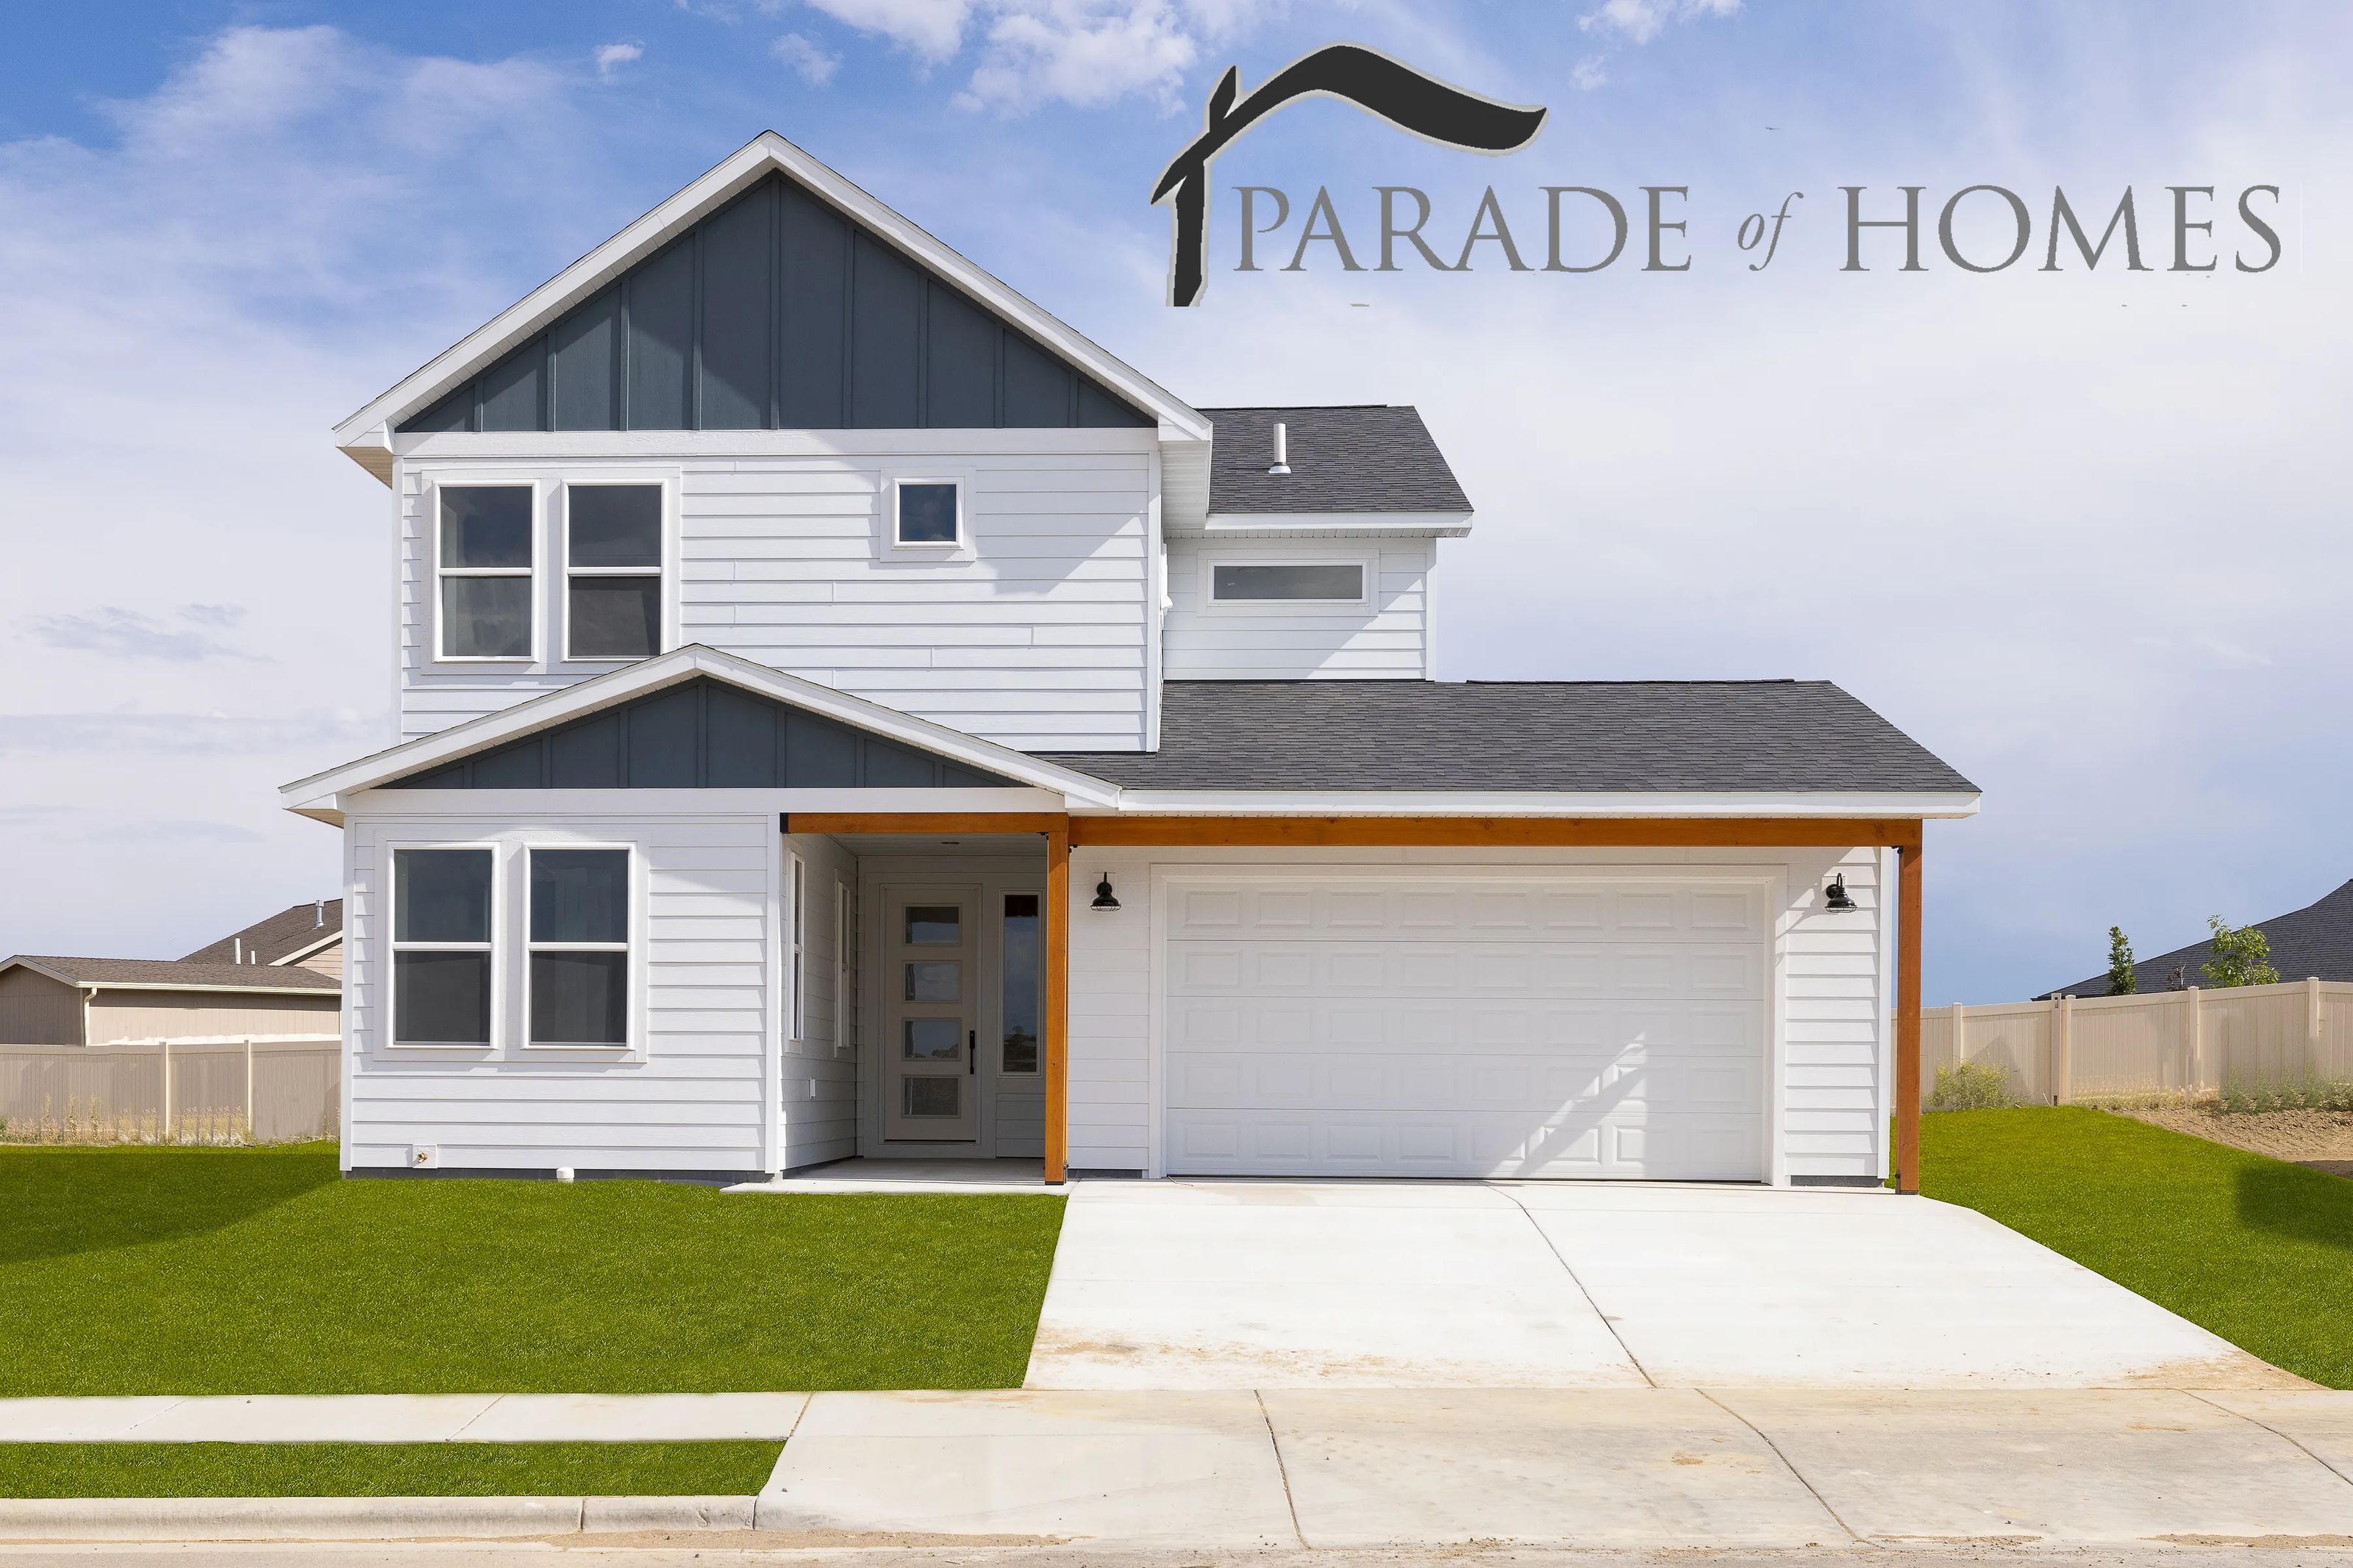 Parade of Homes WrapUp